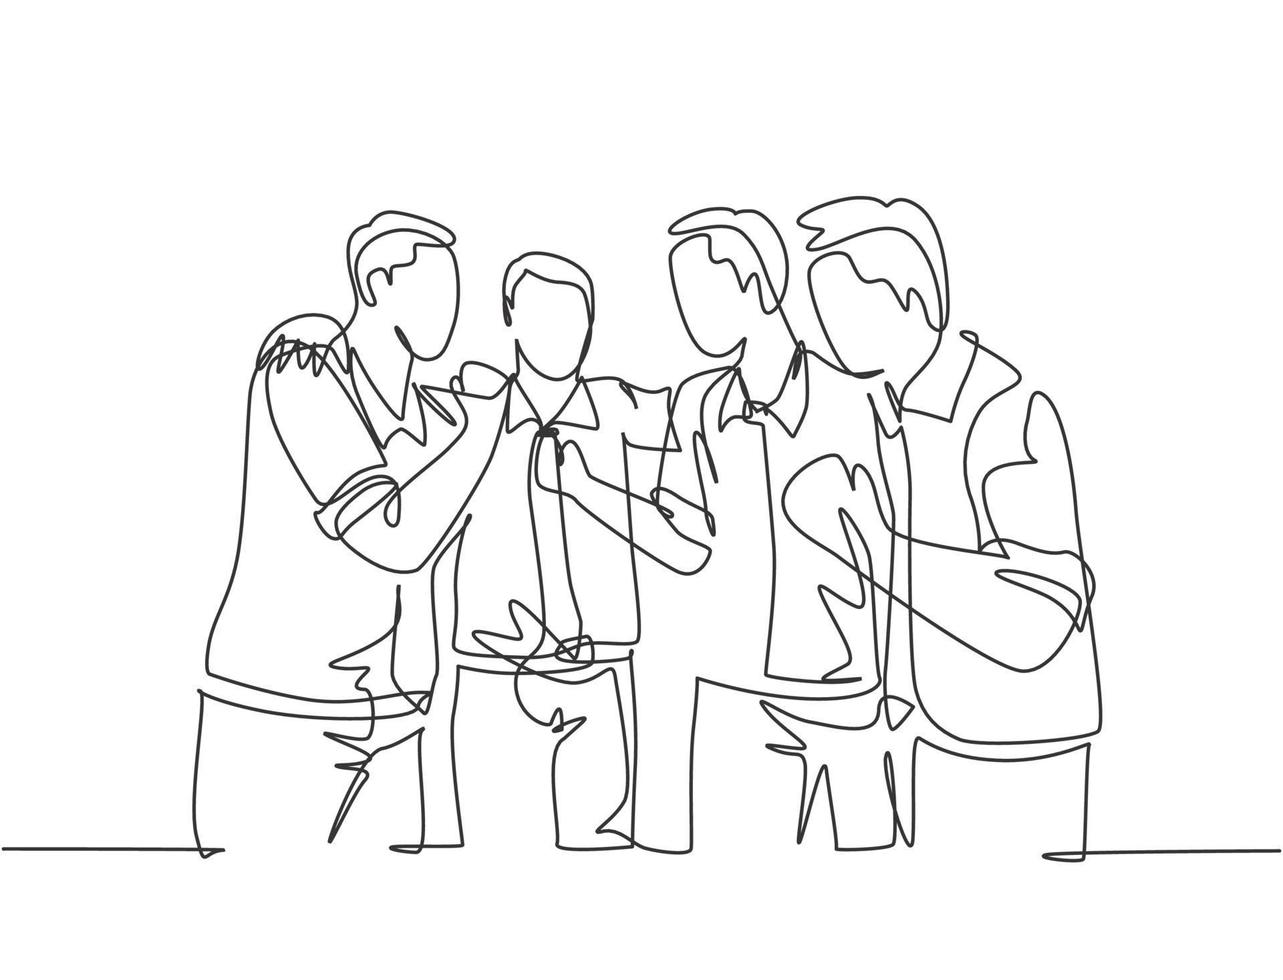 Single continuous line drawing of happy male team member cheering together and hugging each other to celebrate their success. Business team concept. One line draw design vector illustration